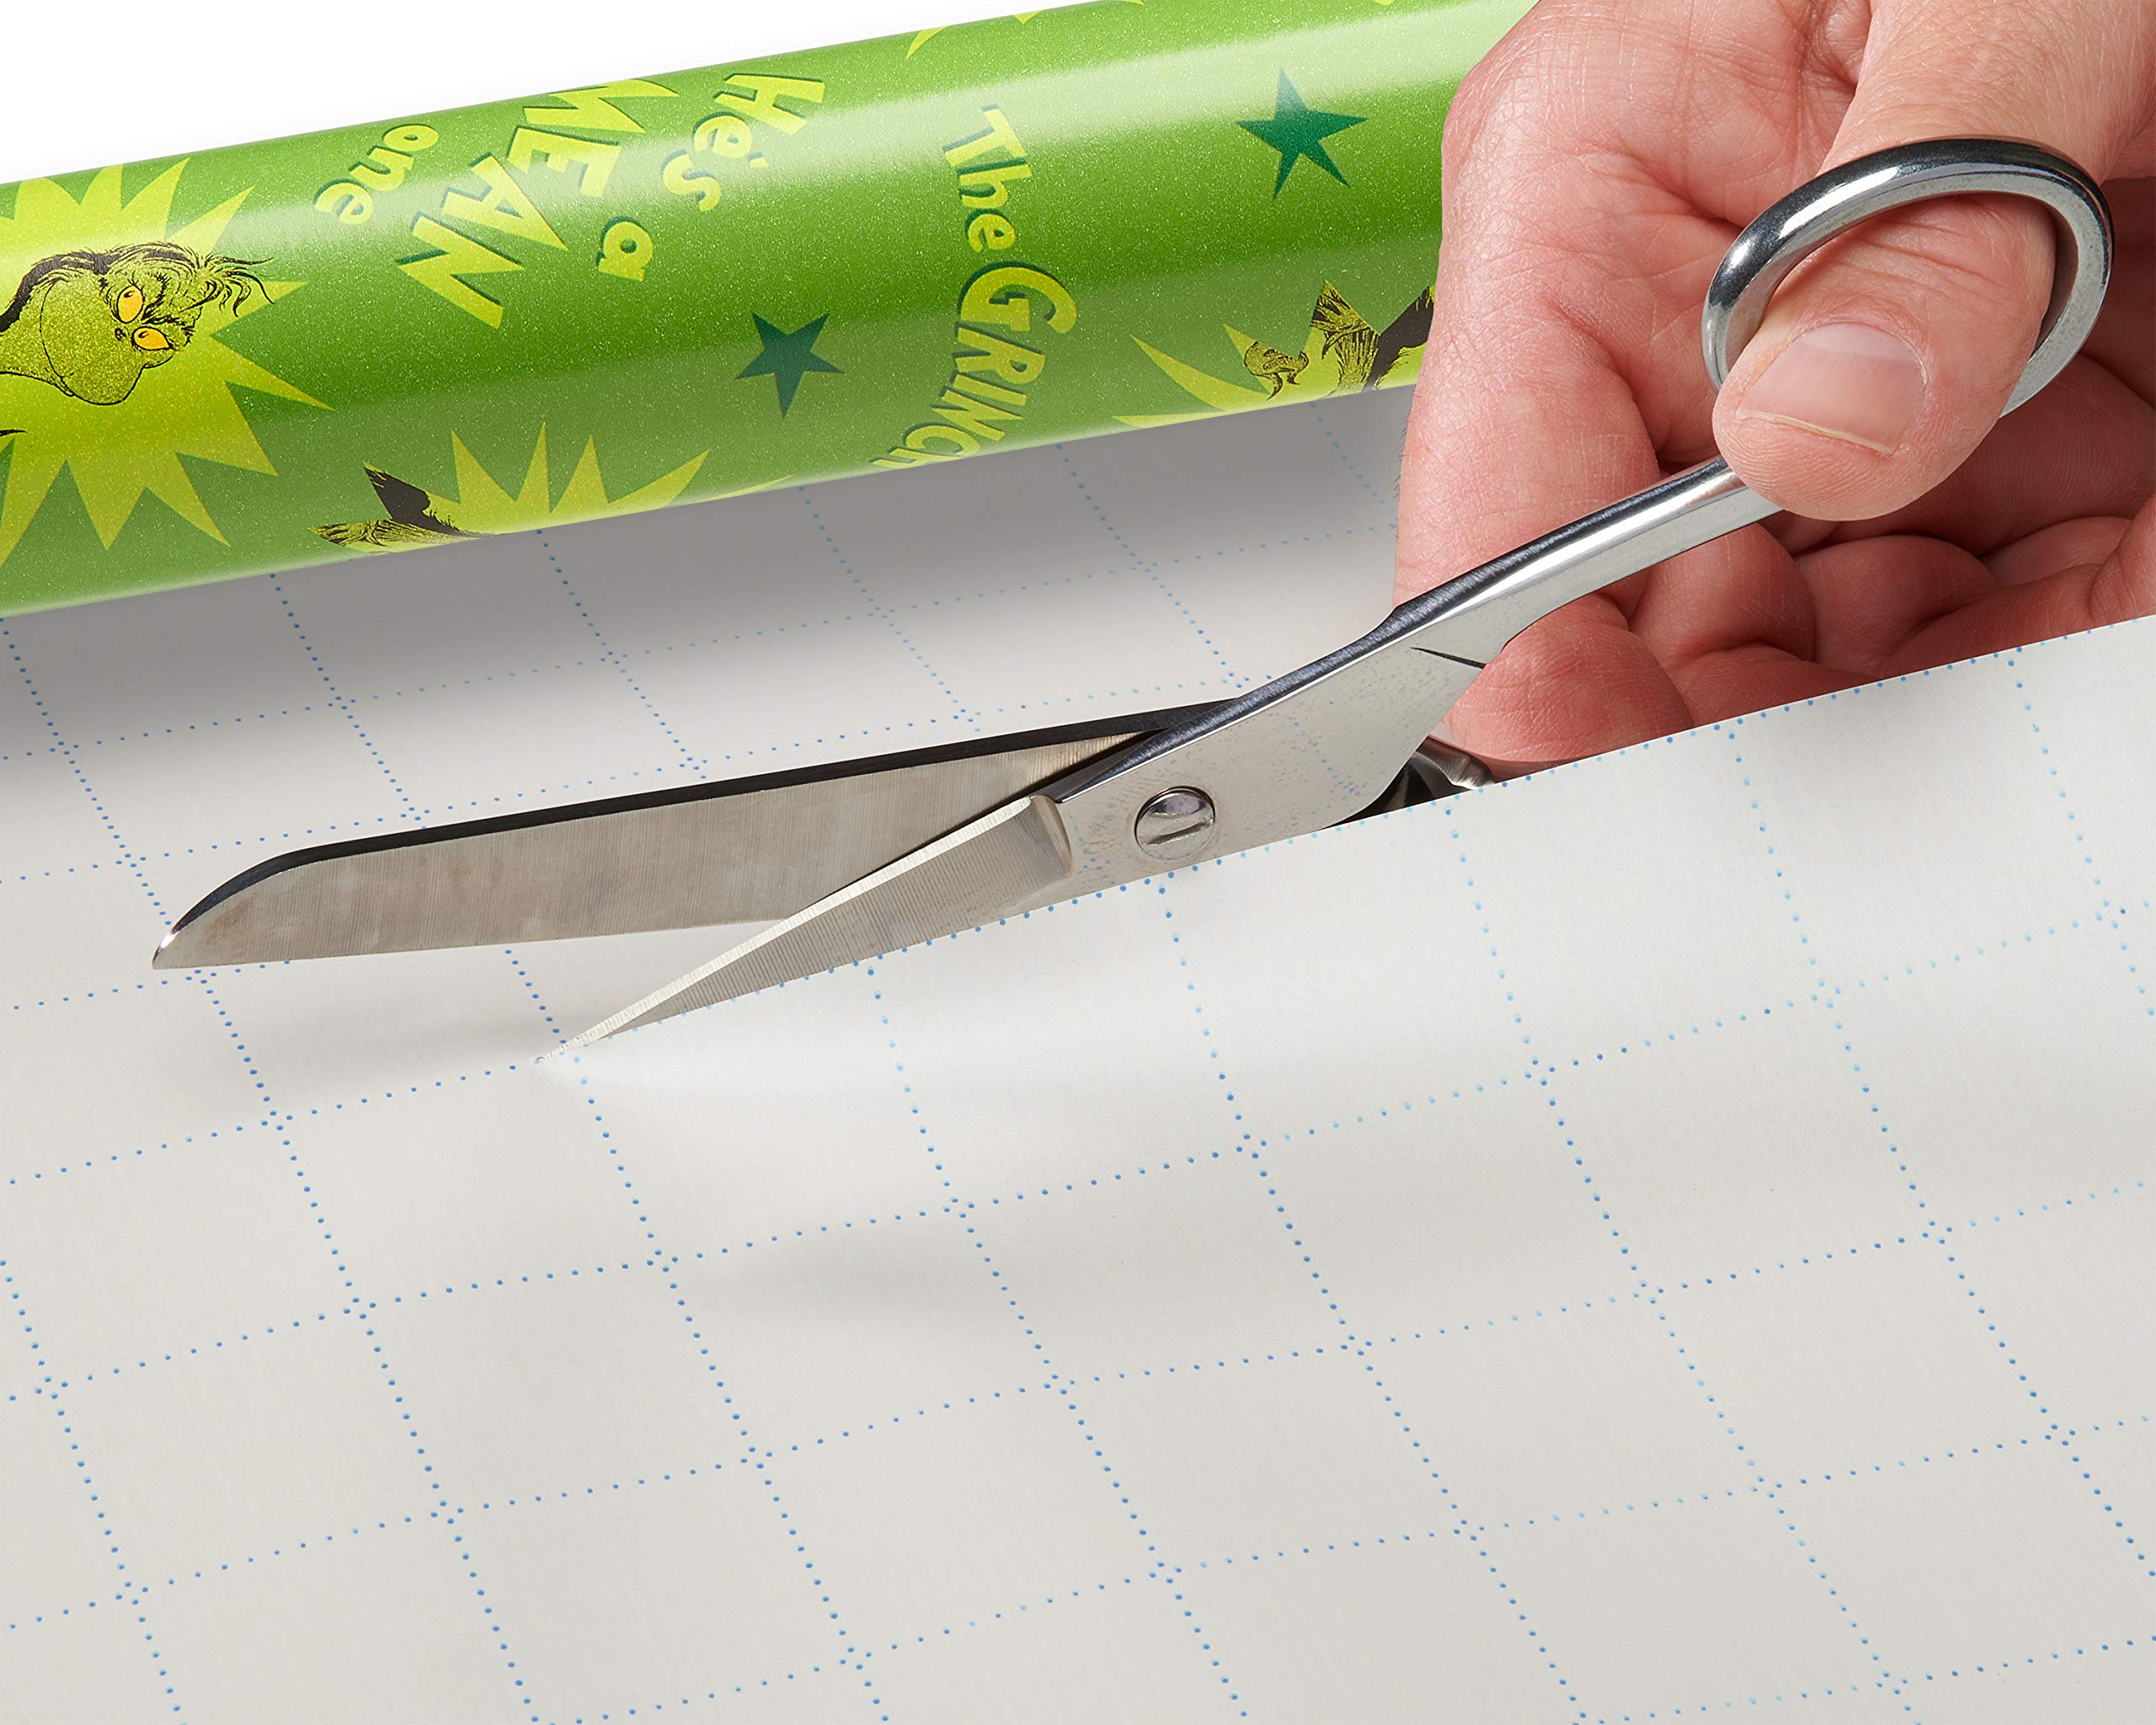 American Greetings Christmas Wrapping Paper with Cut Lines Bundle, The Grinch (3 Rolls, 105 sq. ft.)